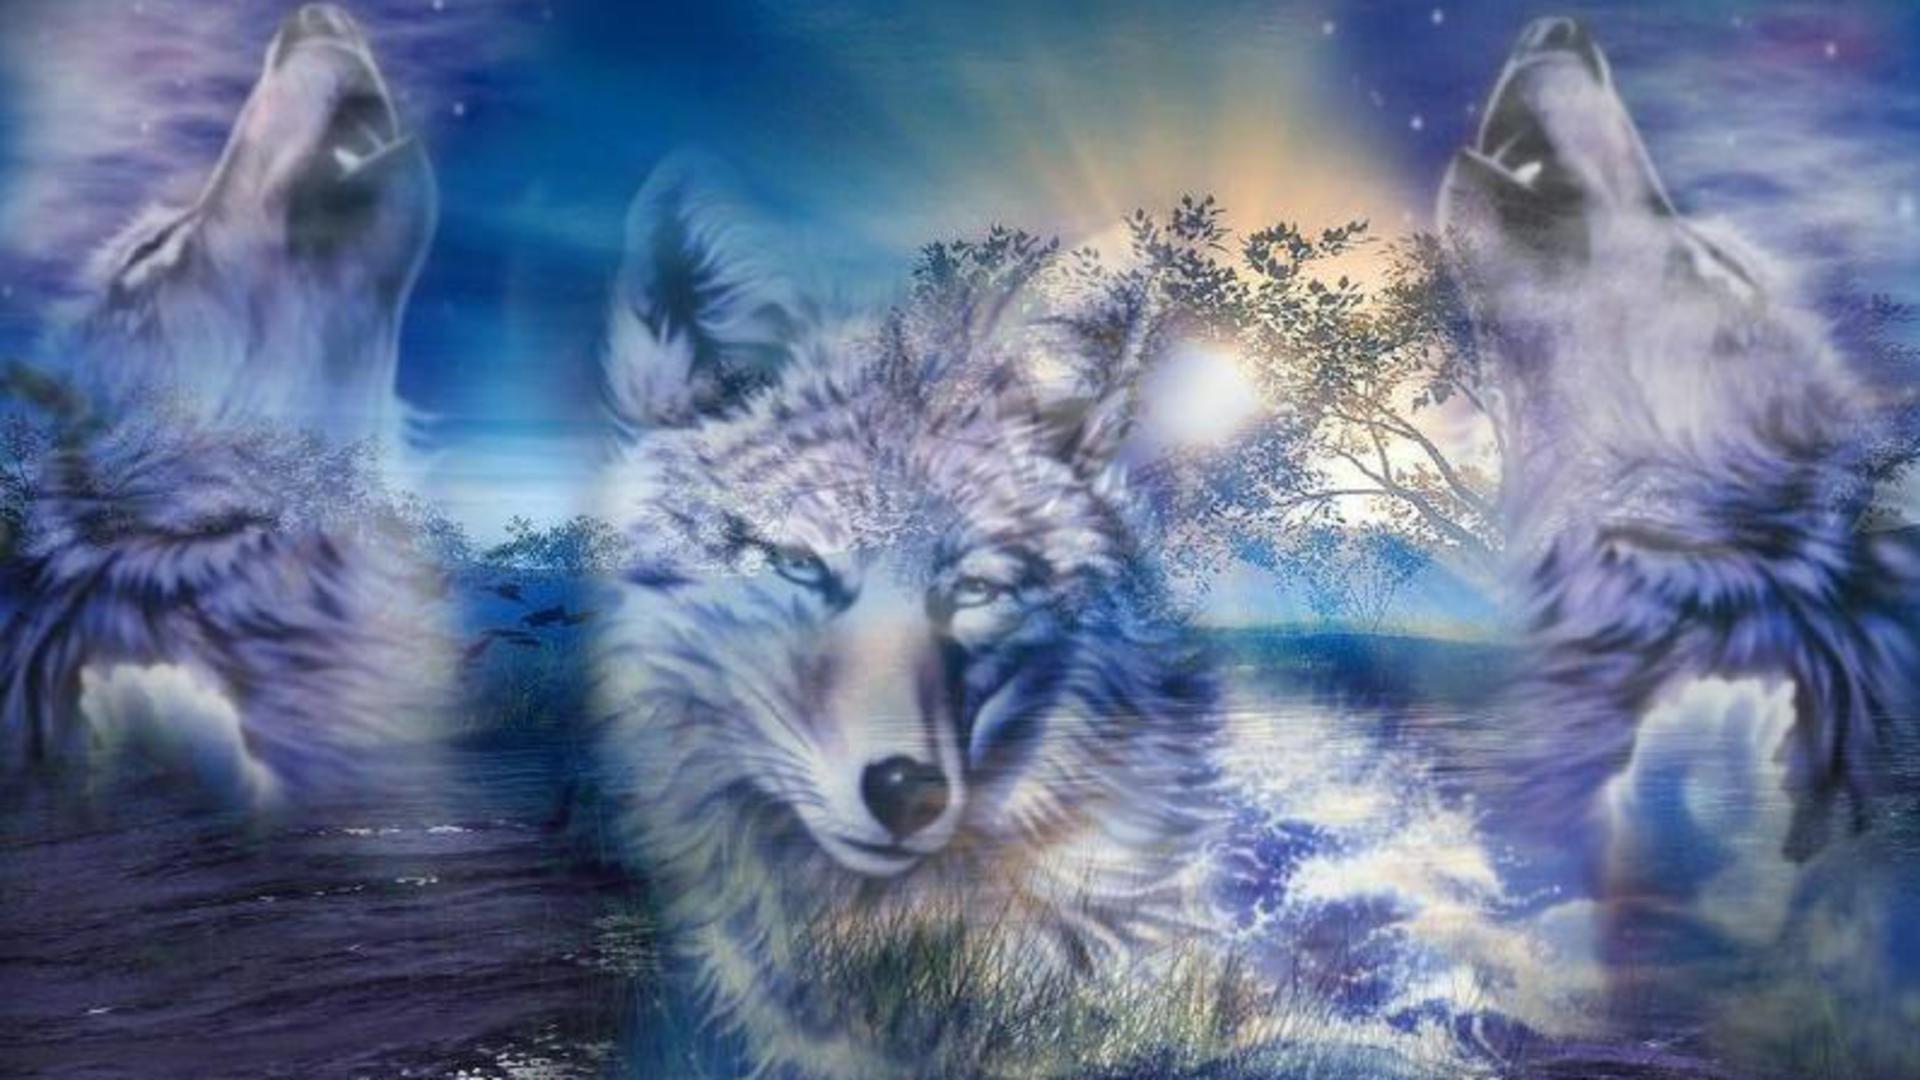 Download Free Wolf Wallpaper. Best Collections of Top Wallpaper